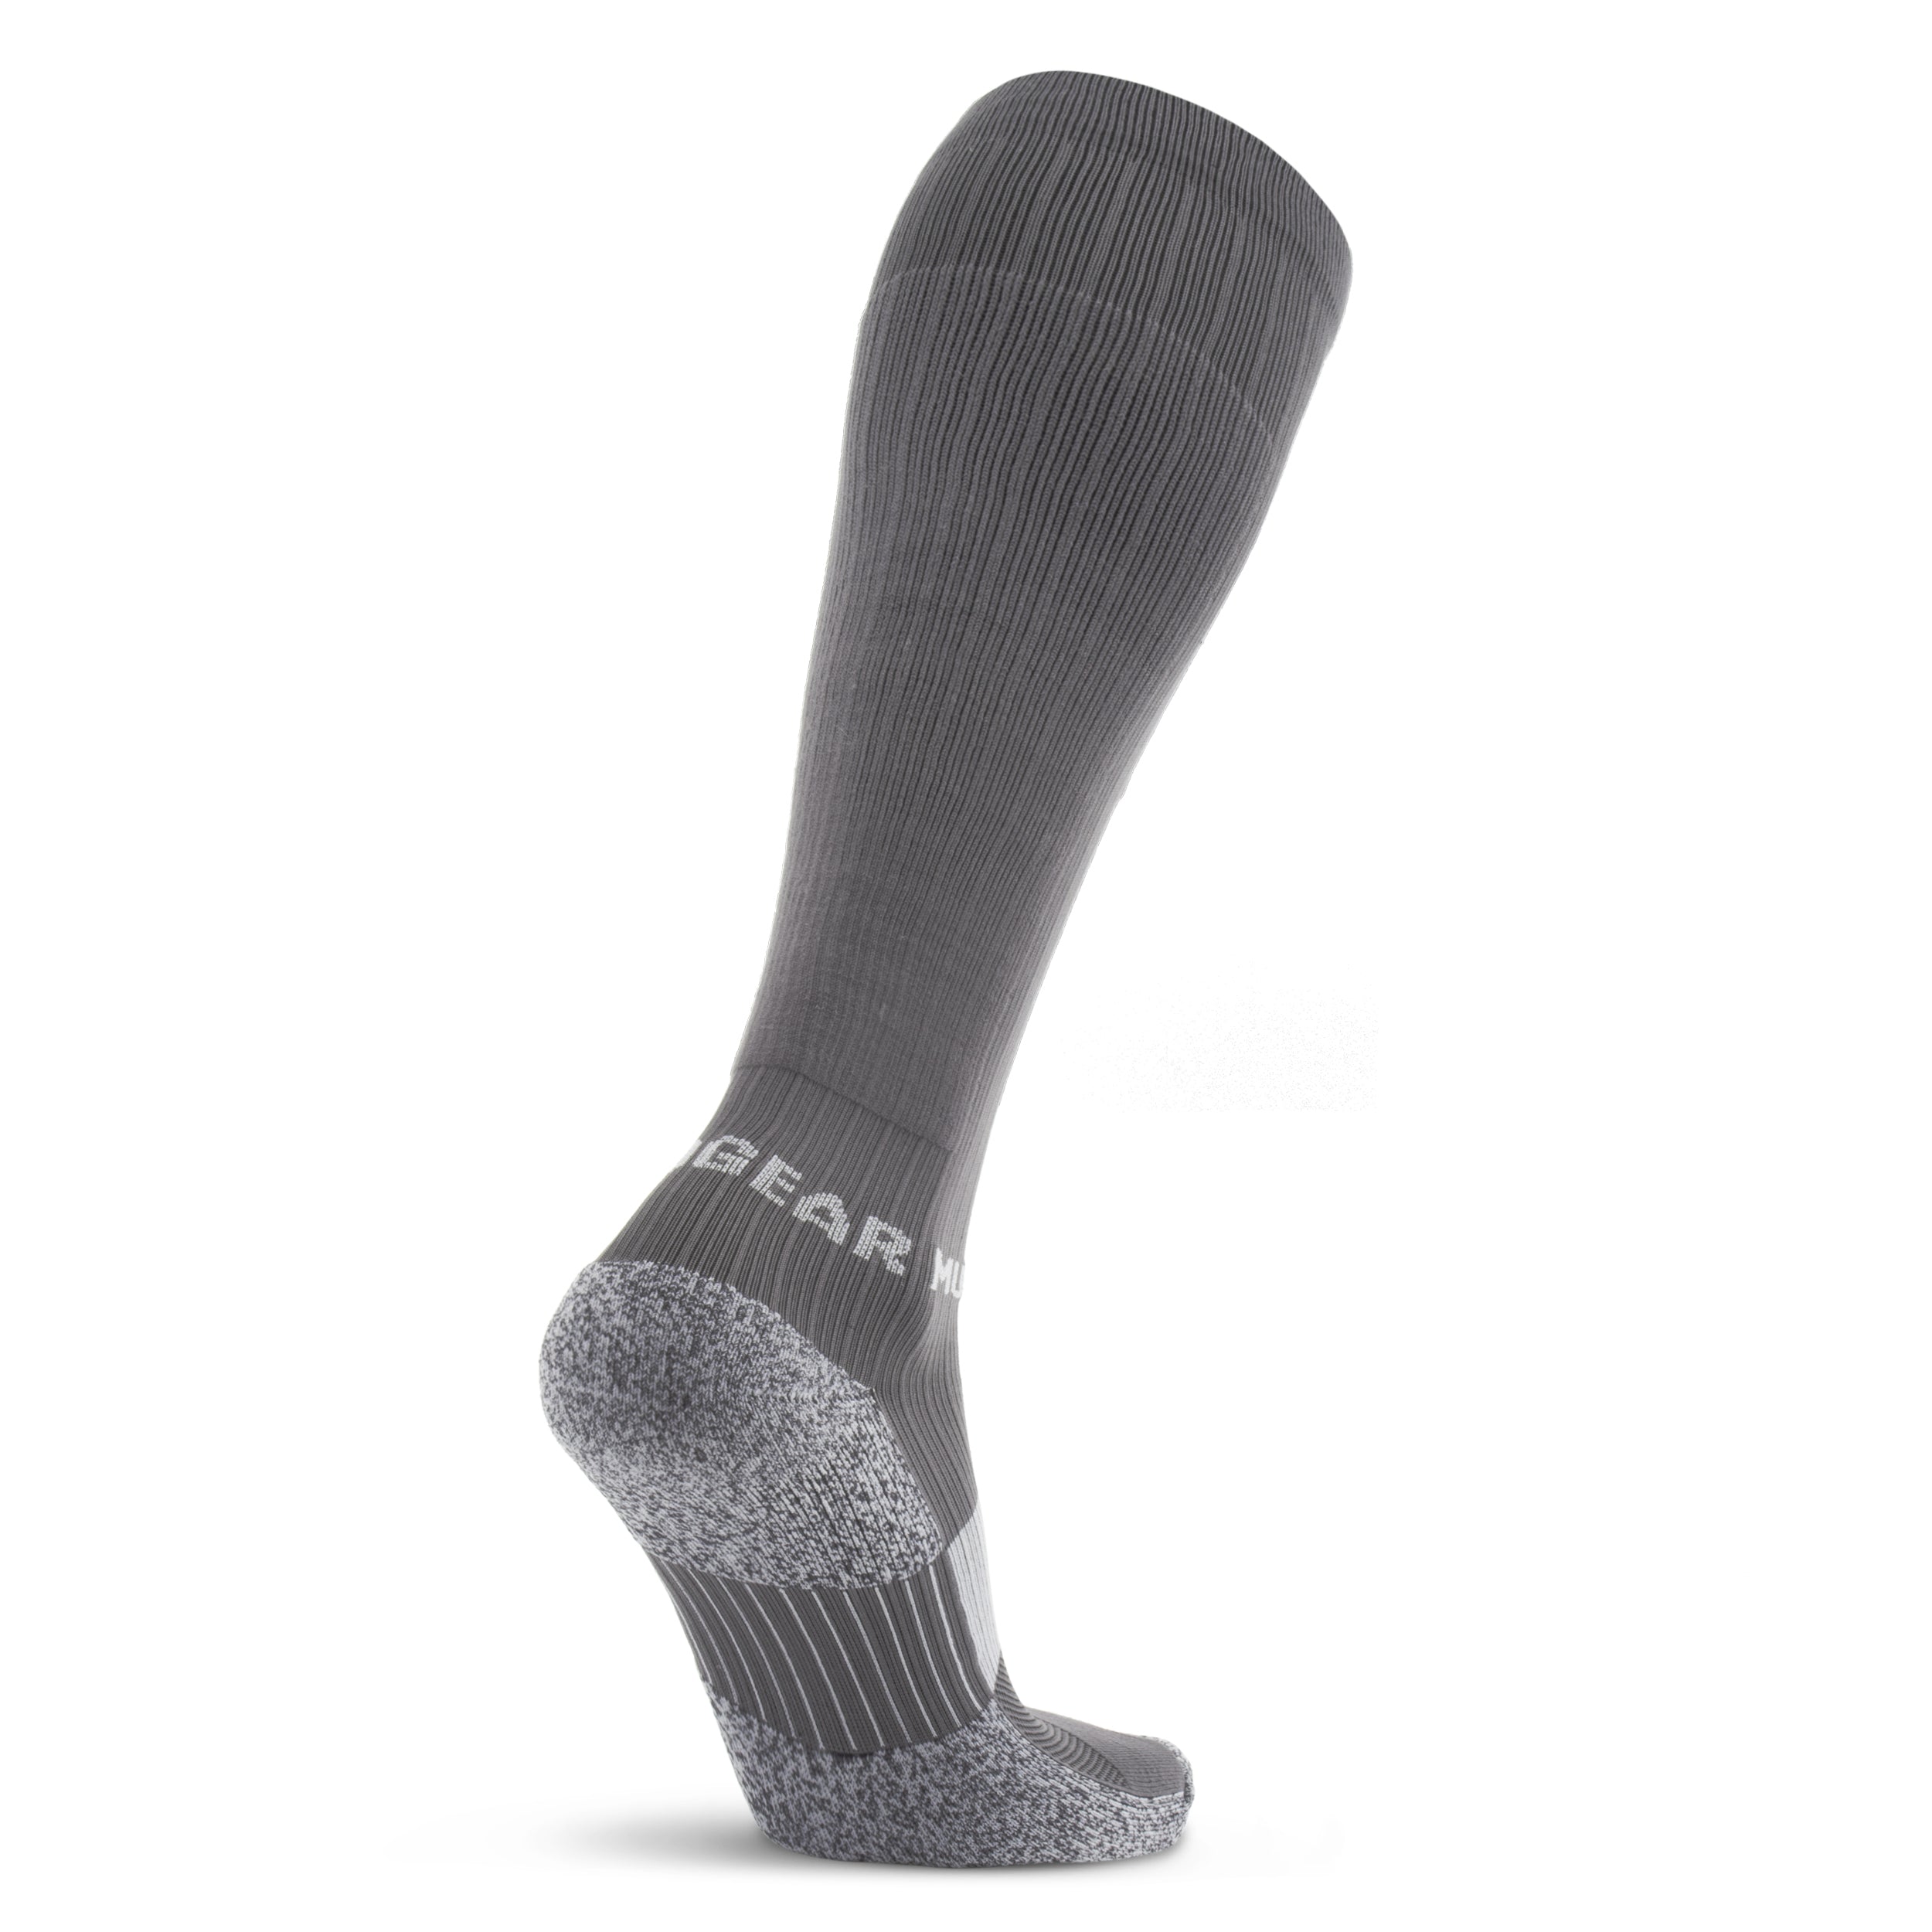 Compression Socks and Shorts: 7 Benefits of These Garments – SRC Health